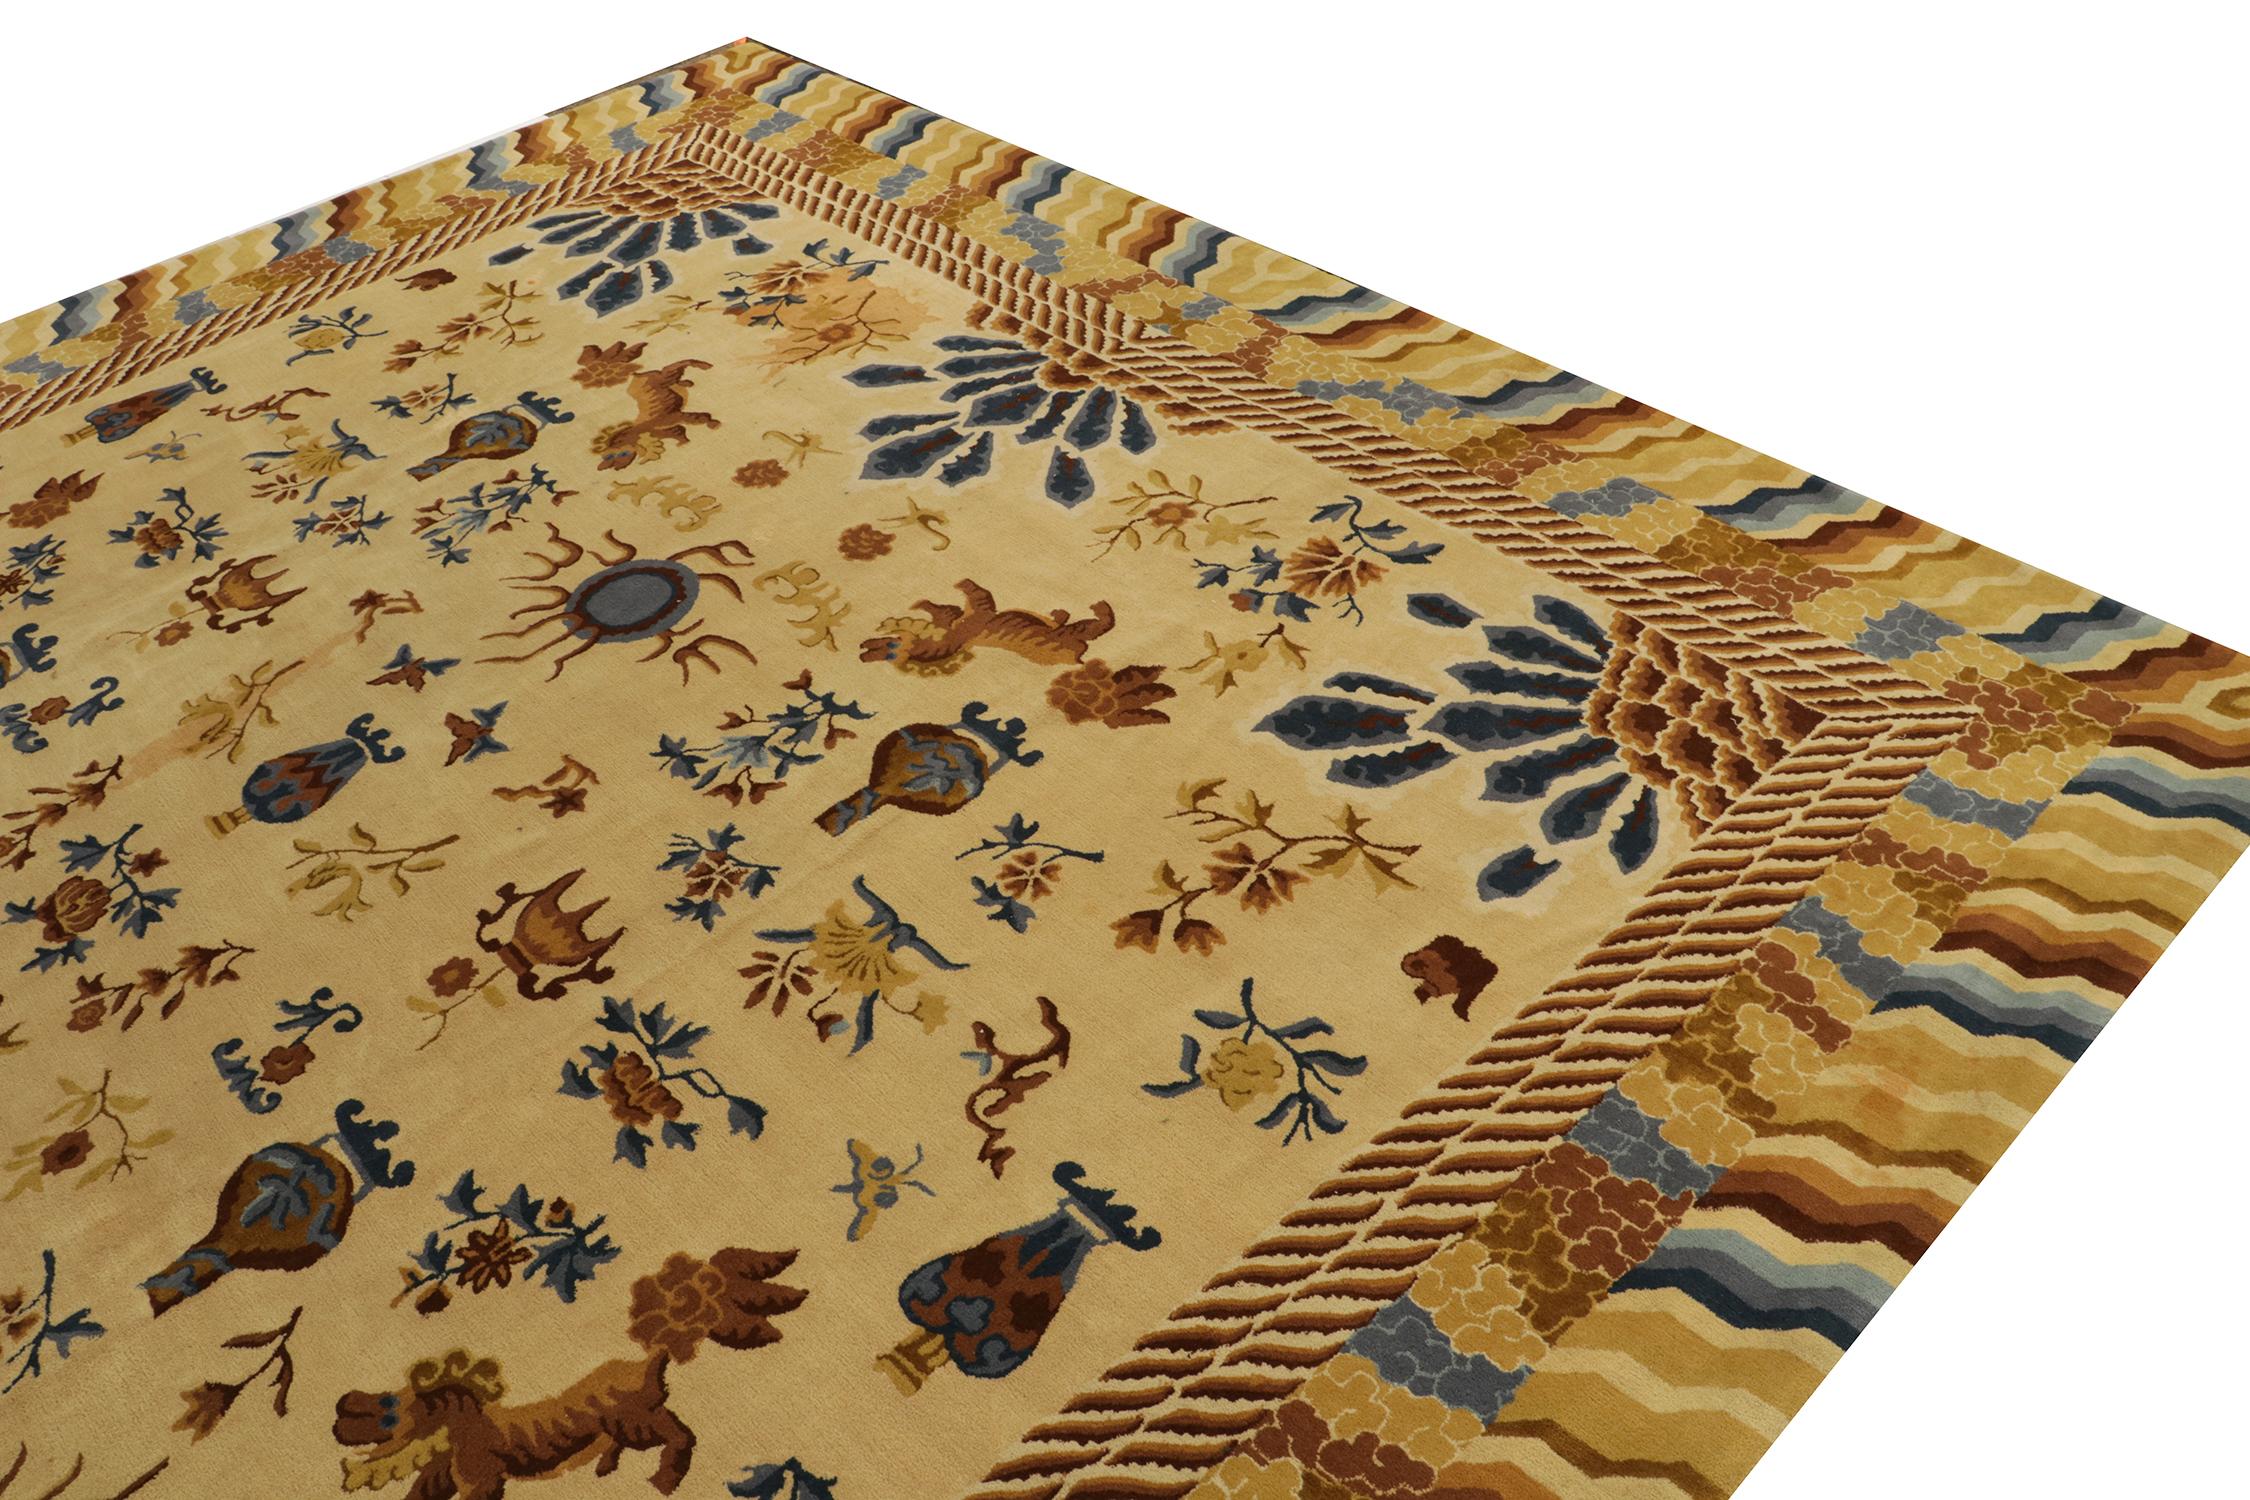 Hand-Knotted Antique Hooked Rug Gold, Blue & Beige Chinese Pictorial Style by Rug & Kilim For Sale